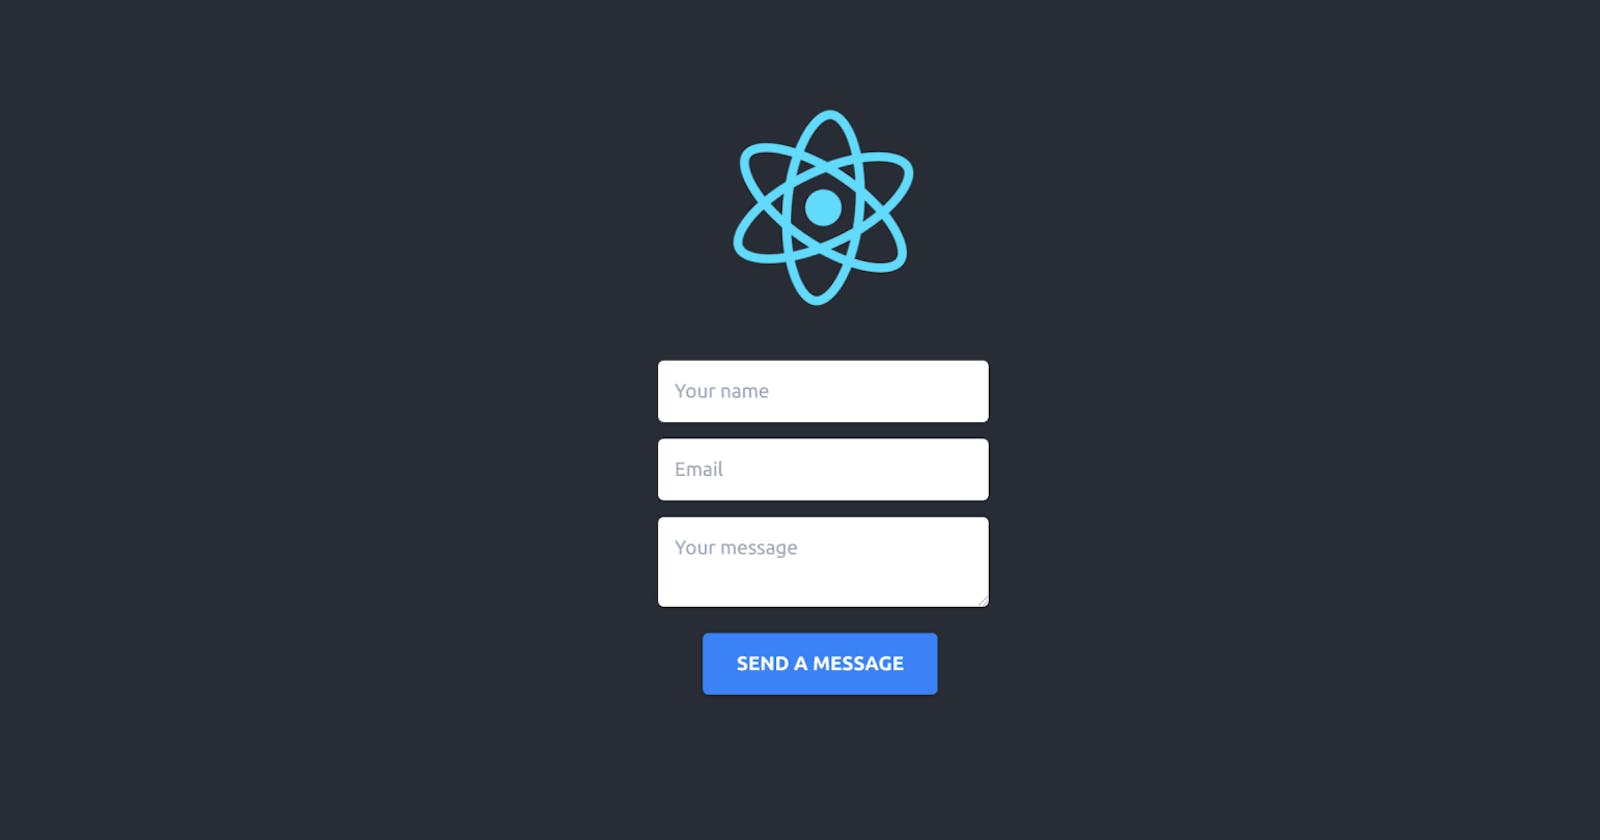 How I Build Forms Quickly in React